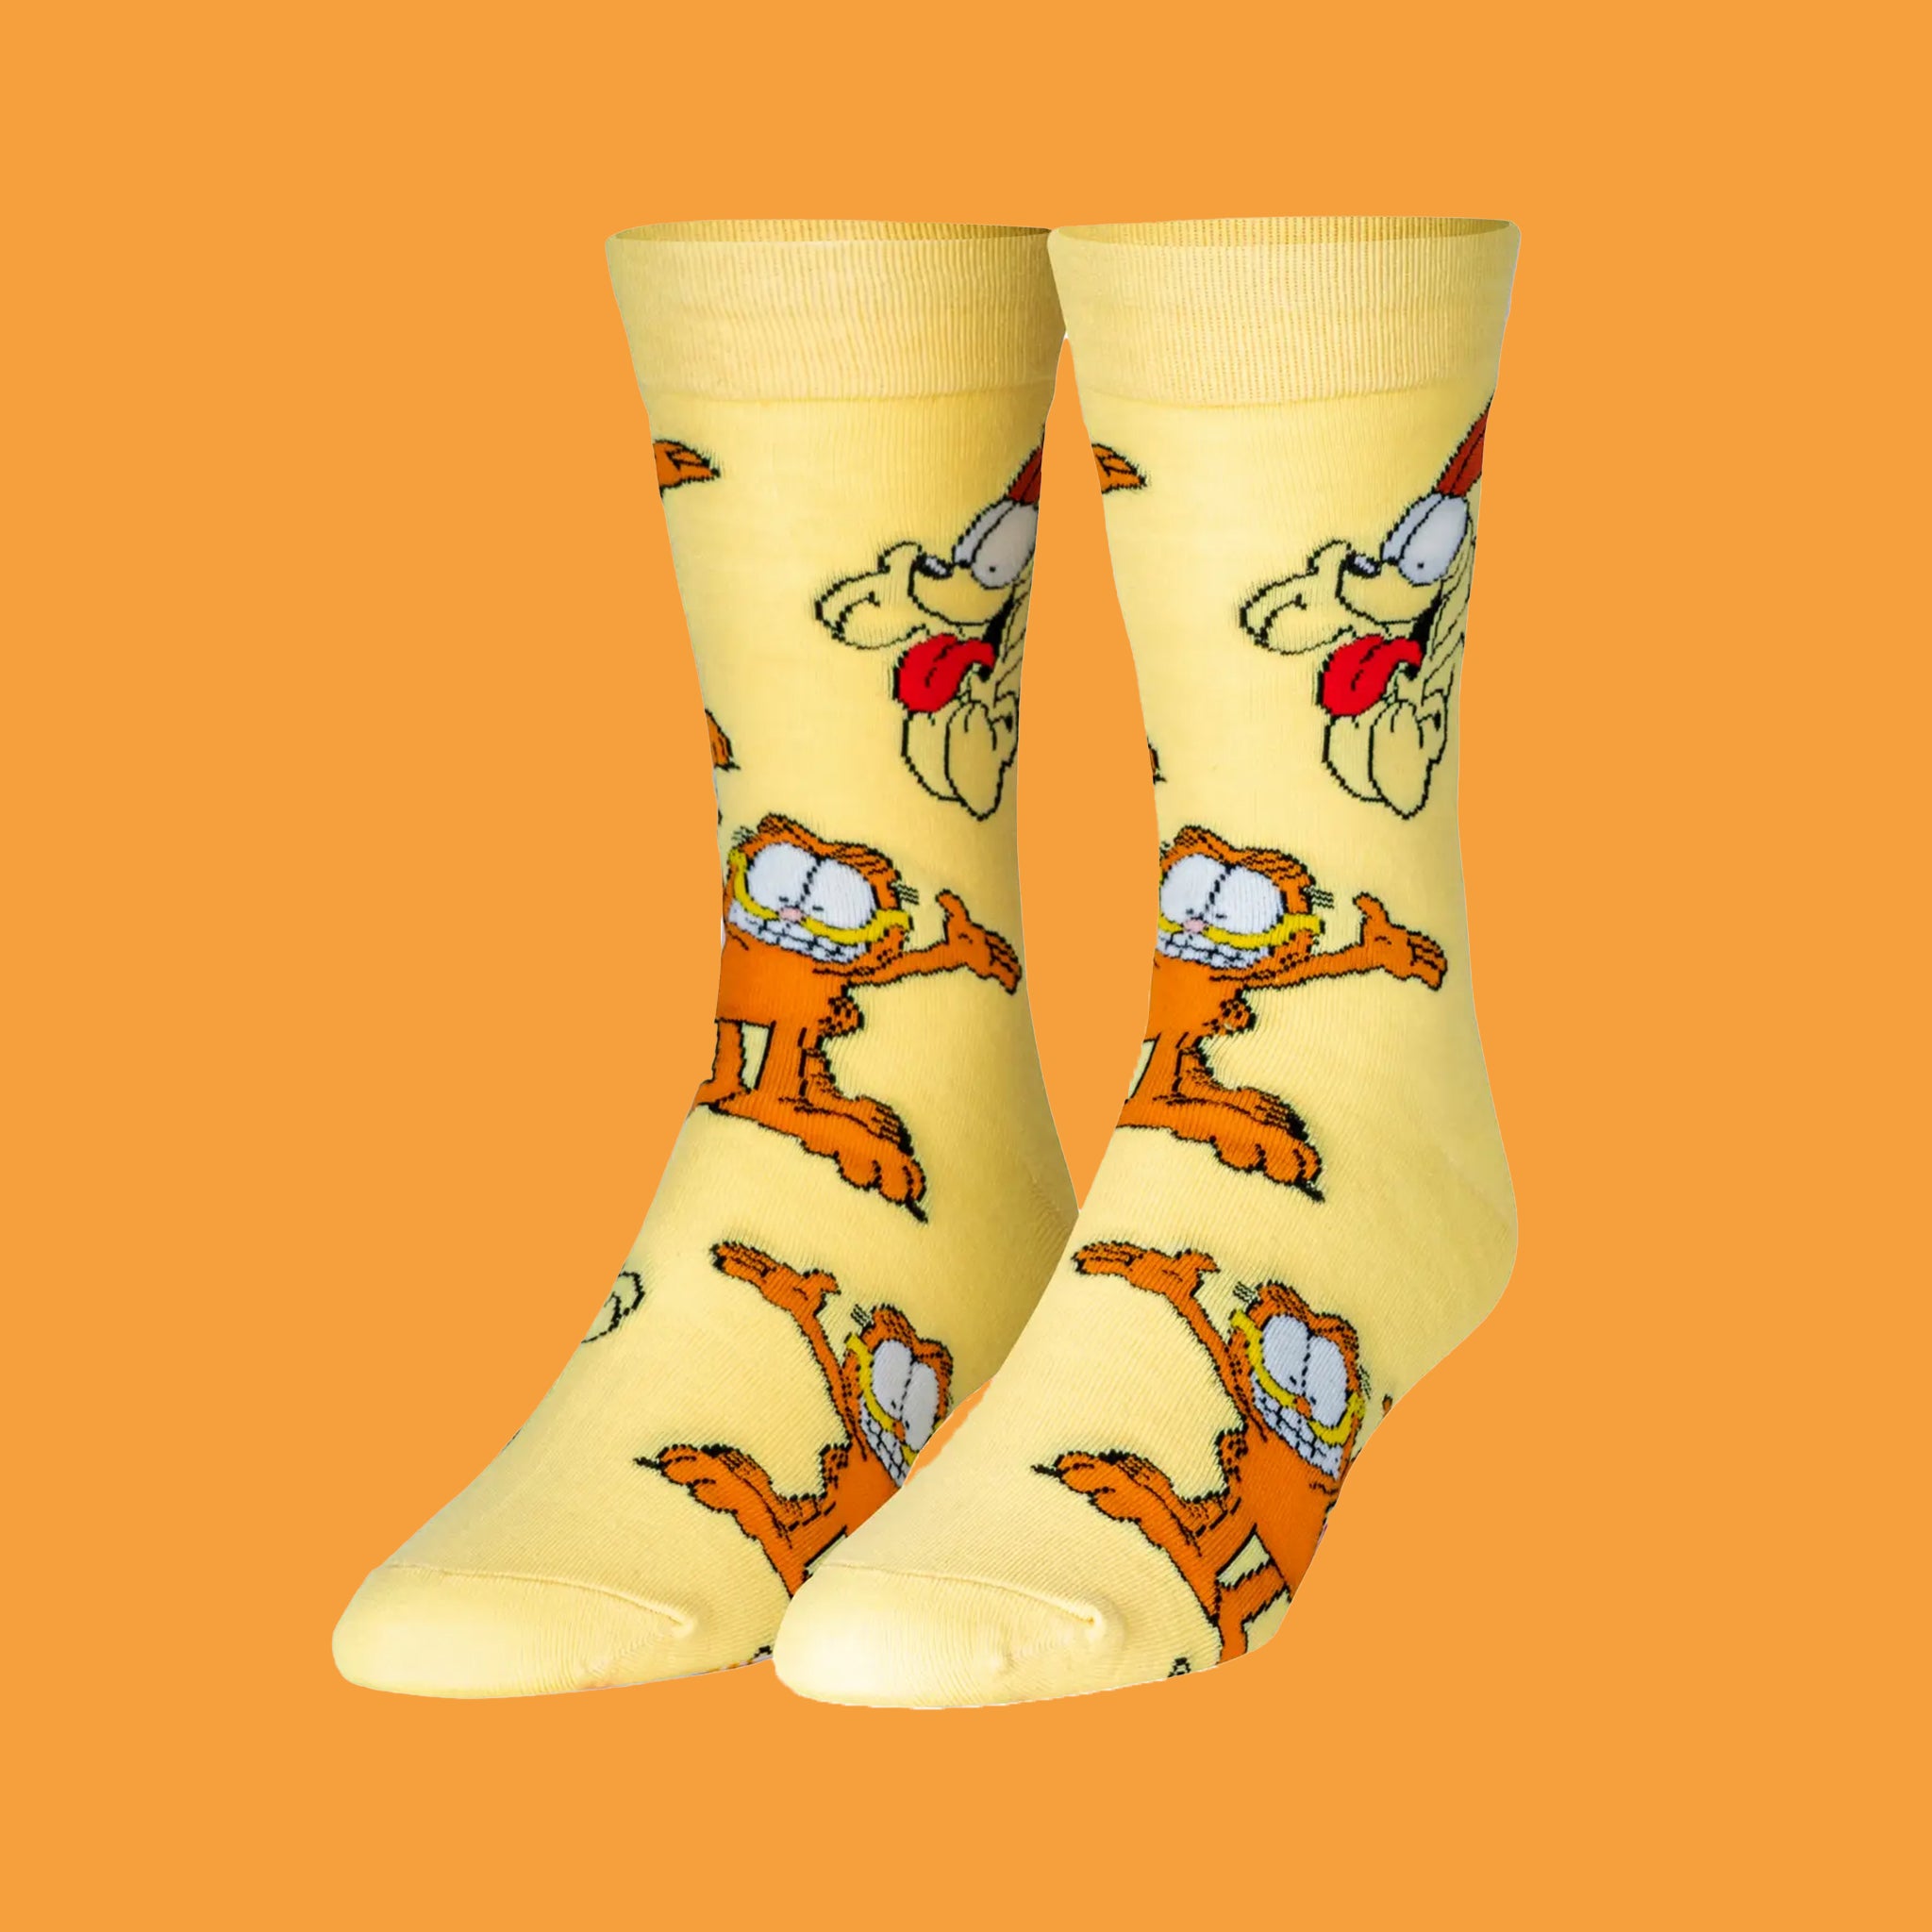 On an orange background is a yellow pair of socks with a garfield print.